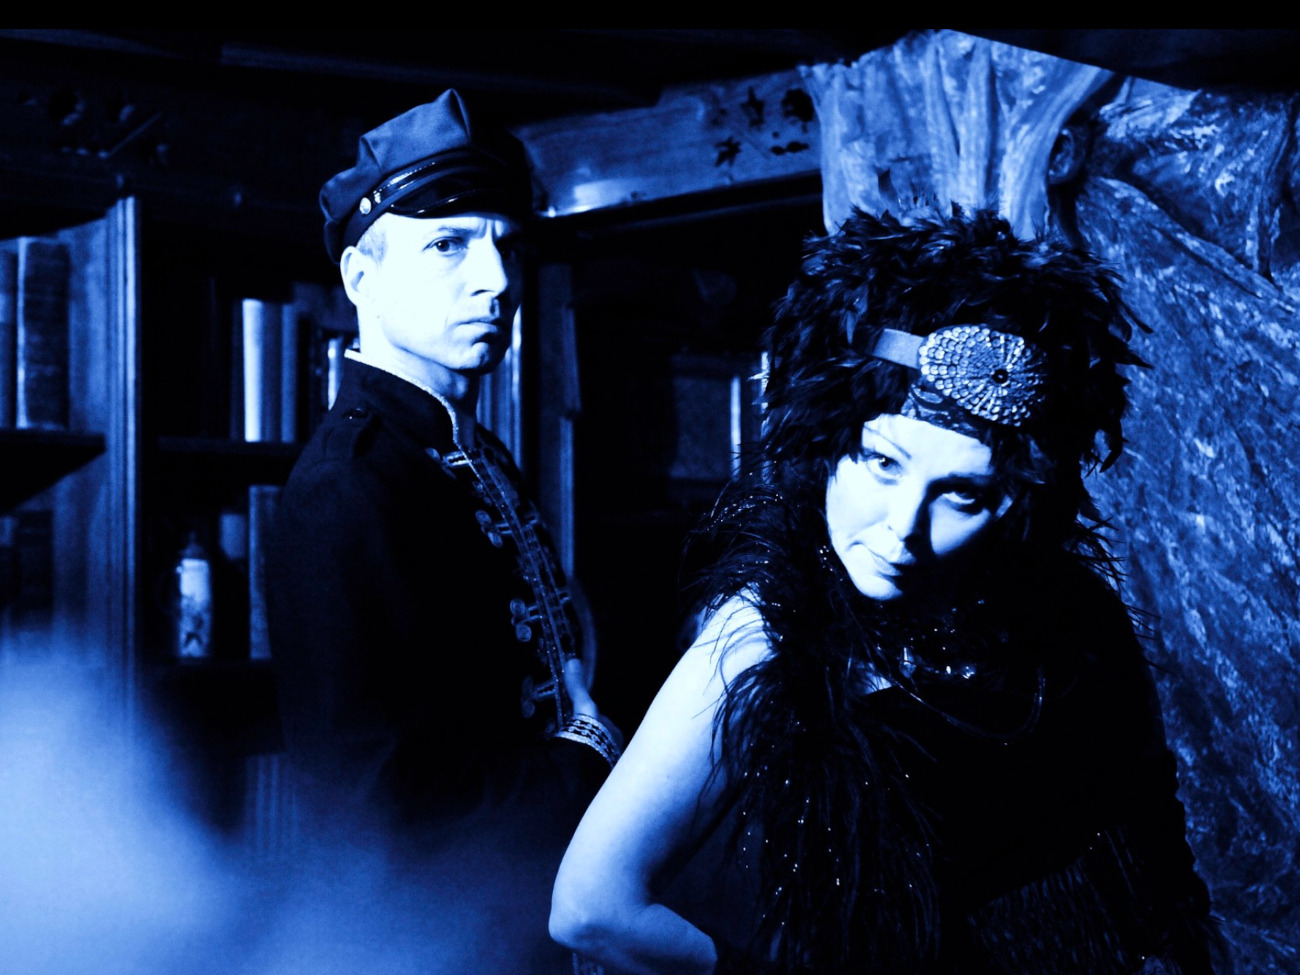 The two actors from the Literaturkeller, Benedikt Vermeer and Gala Z, can be seen in a blue light and in costumes.